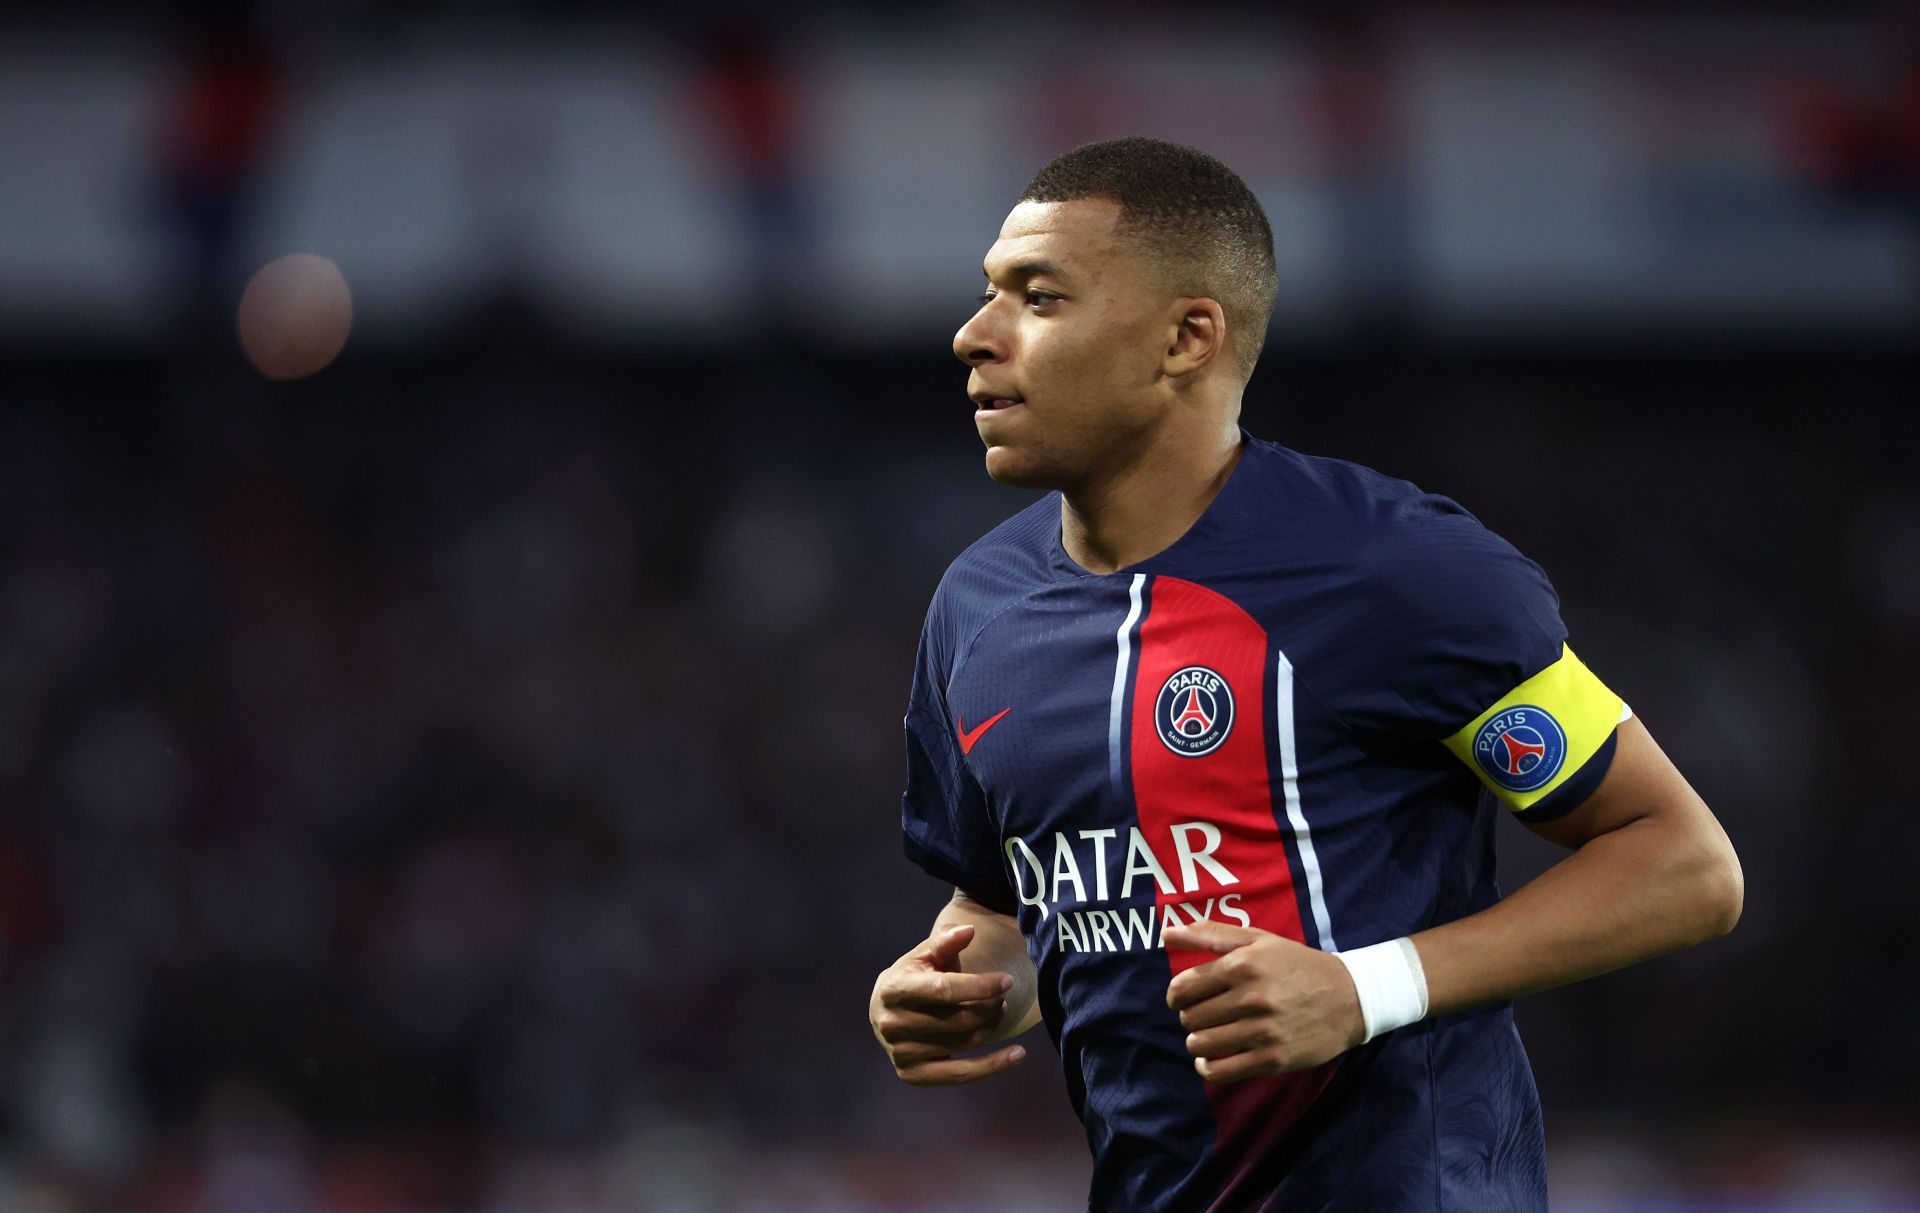 PSG are looking to avoid losing the player on a free.